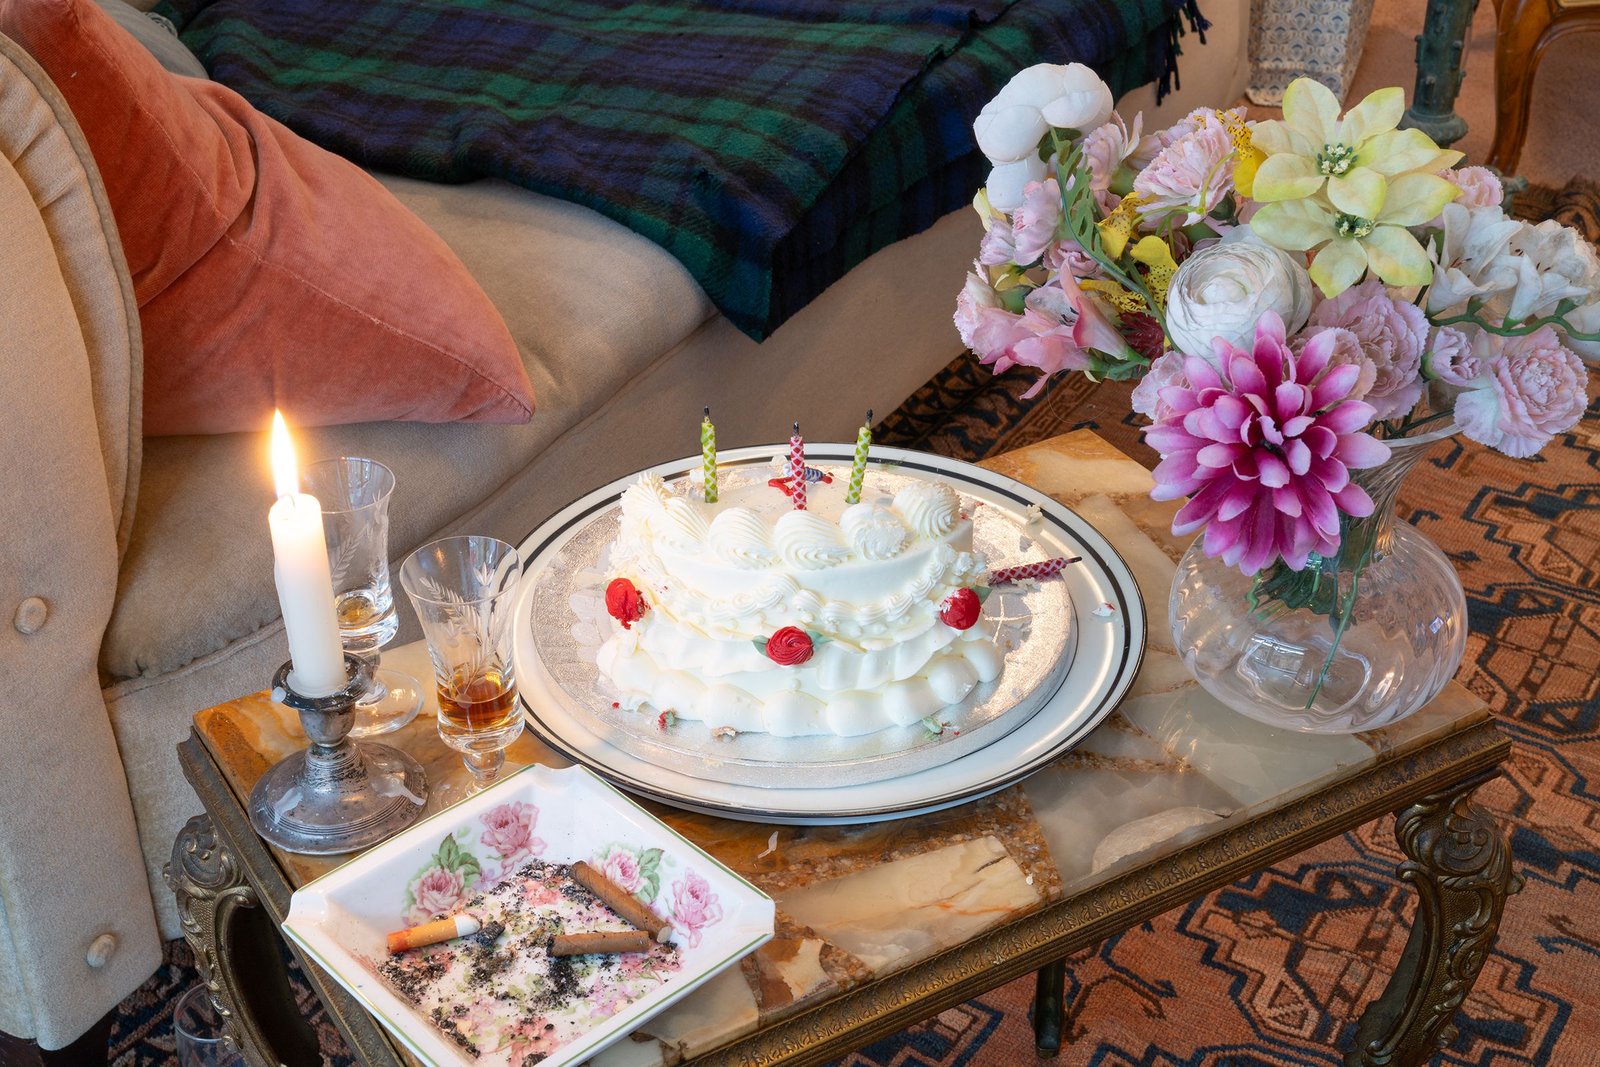 coffee table with half eaten birthday cake, ashtray and plastic flowers